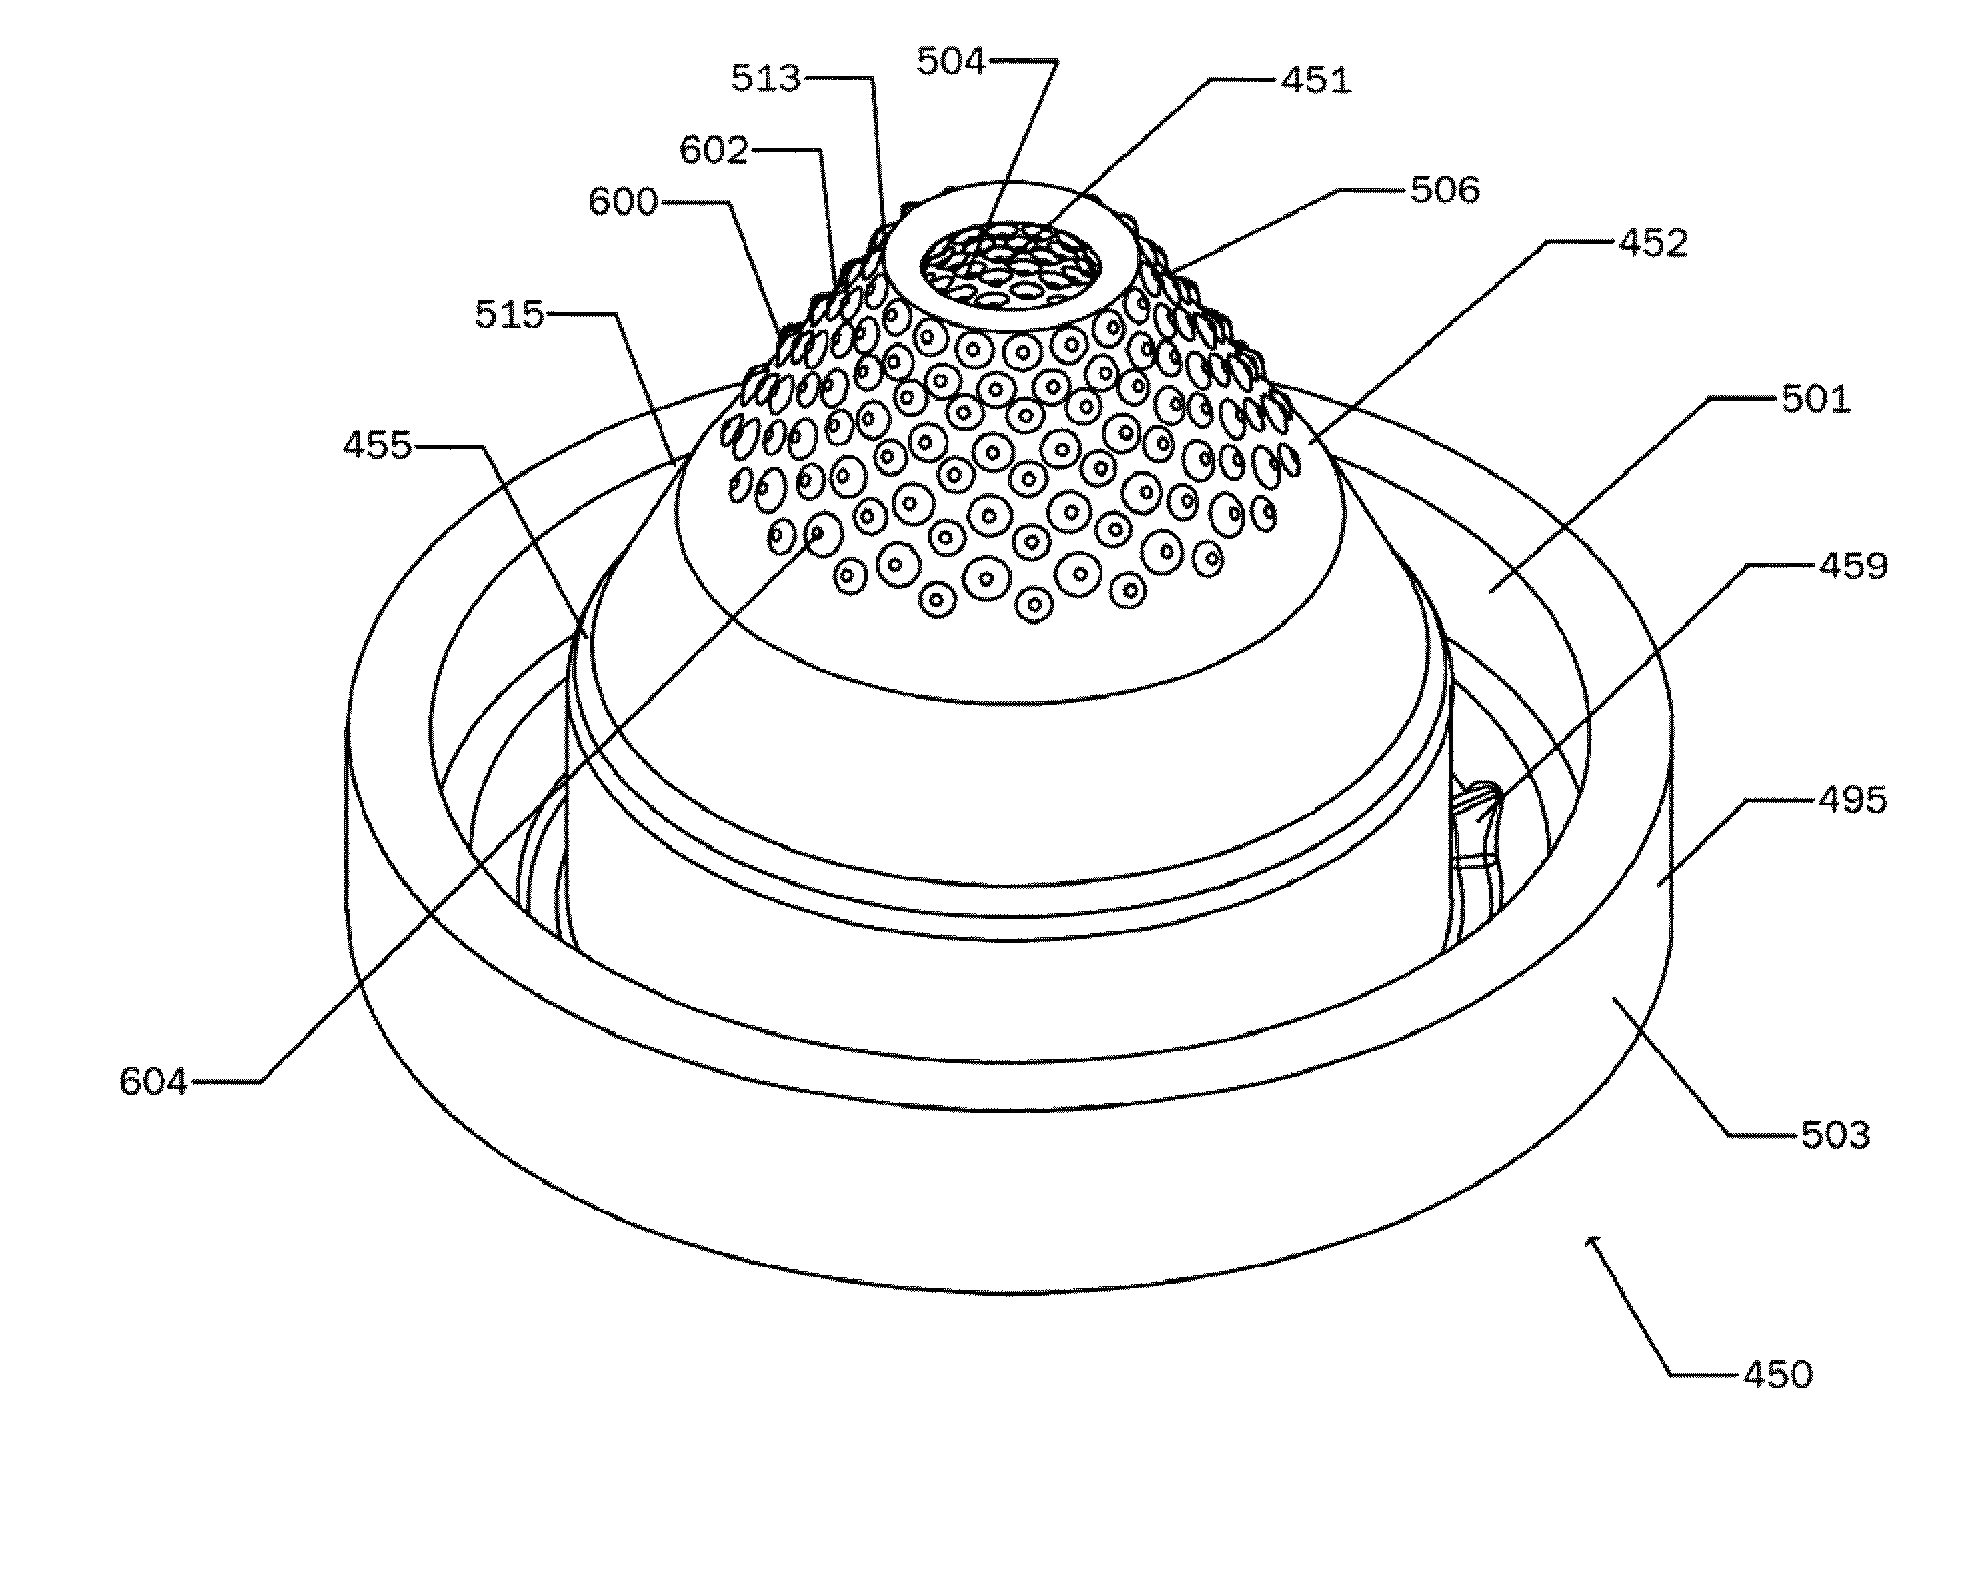 Trocar and cannula assembly having improved conical valve, and methods related thereto